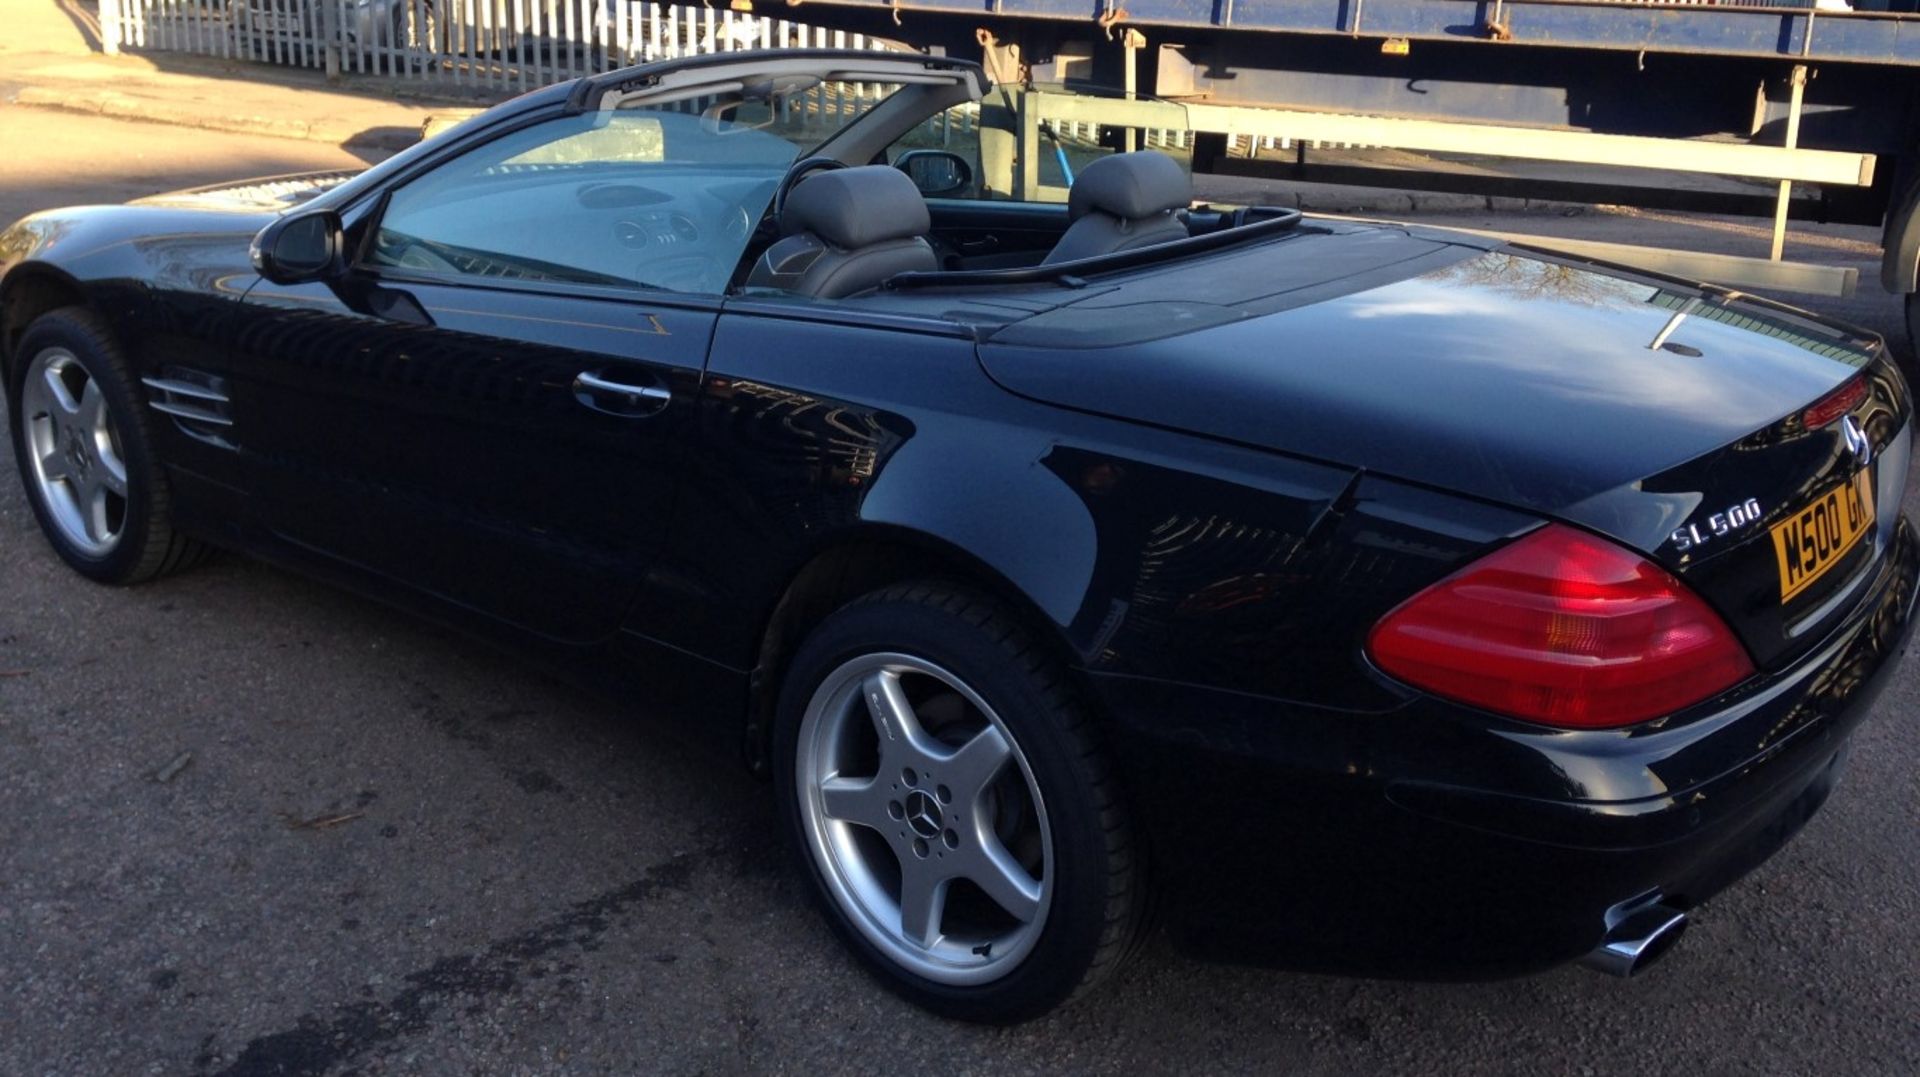 1 x Mercedes SL500 Automatic 5.0 Convertible - Petrol - Year 2002 - 94,500 Miles - Long MOT Expiry - Image 19 of 48